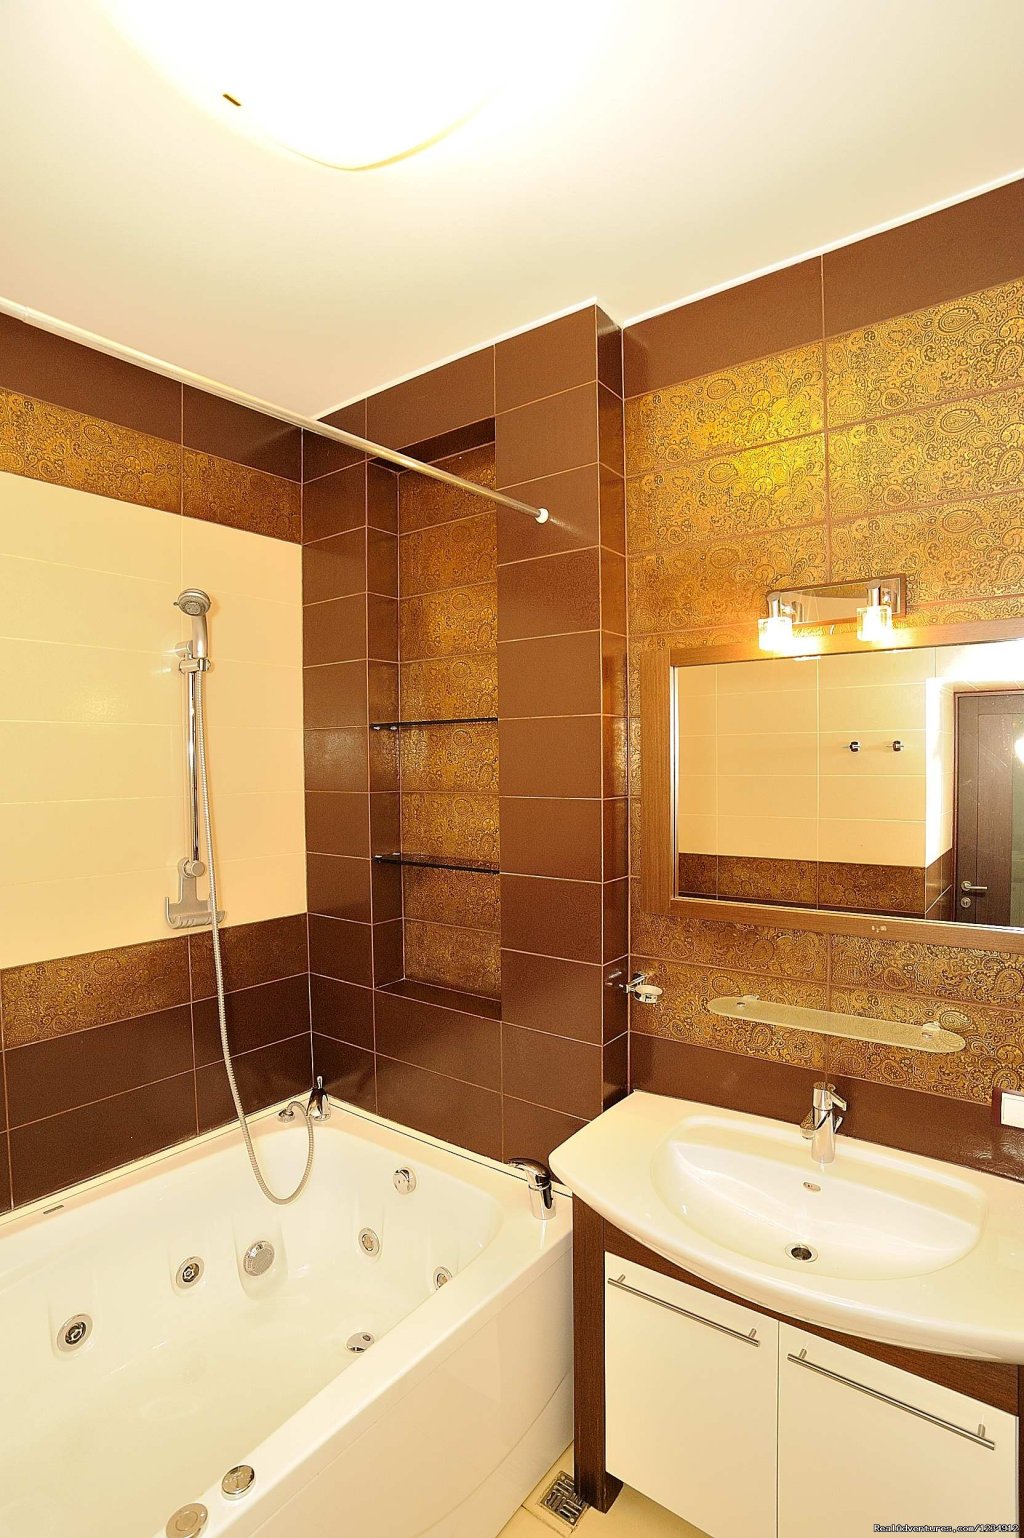 VIP 3room/2 bedroom apartment in the heart of Kiev | Image #23/24 | 